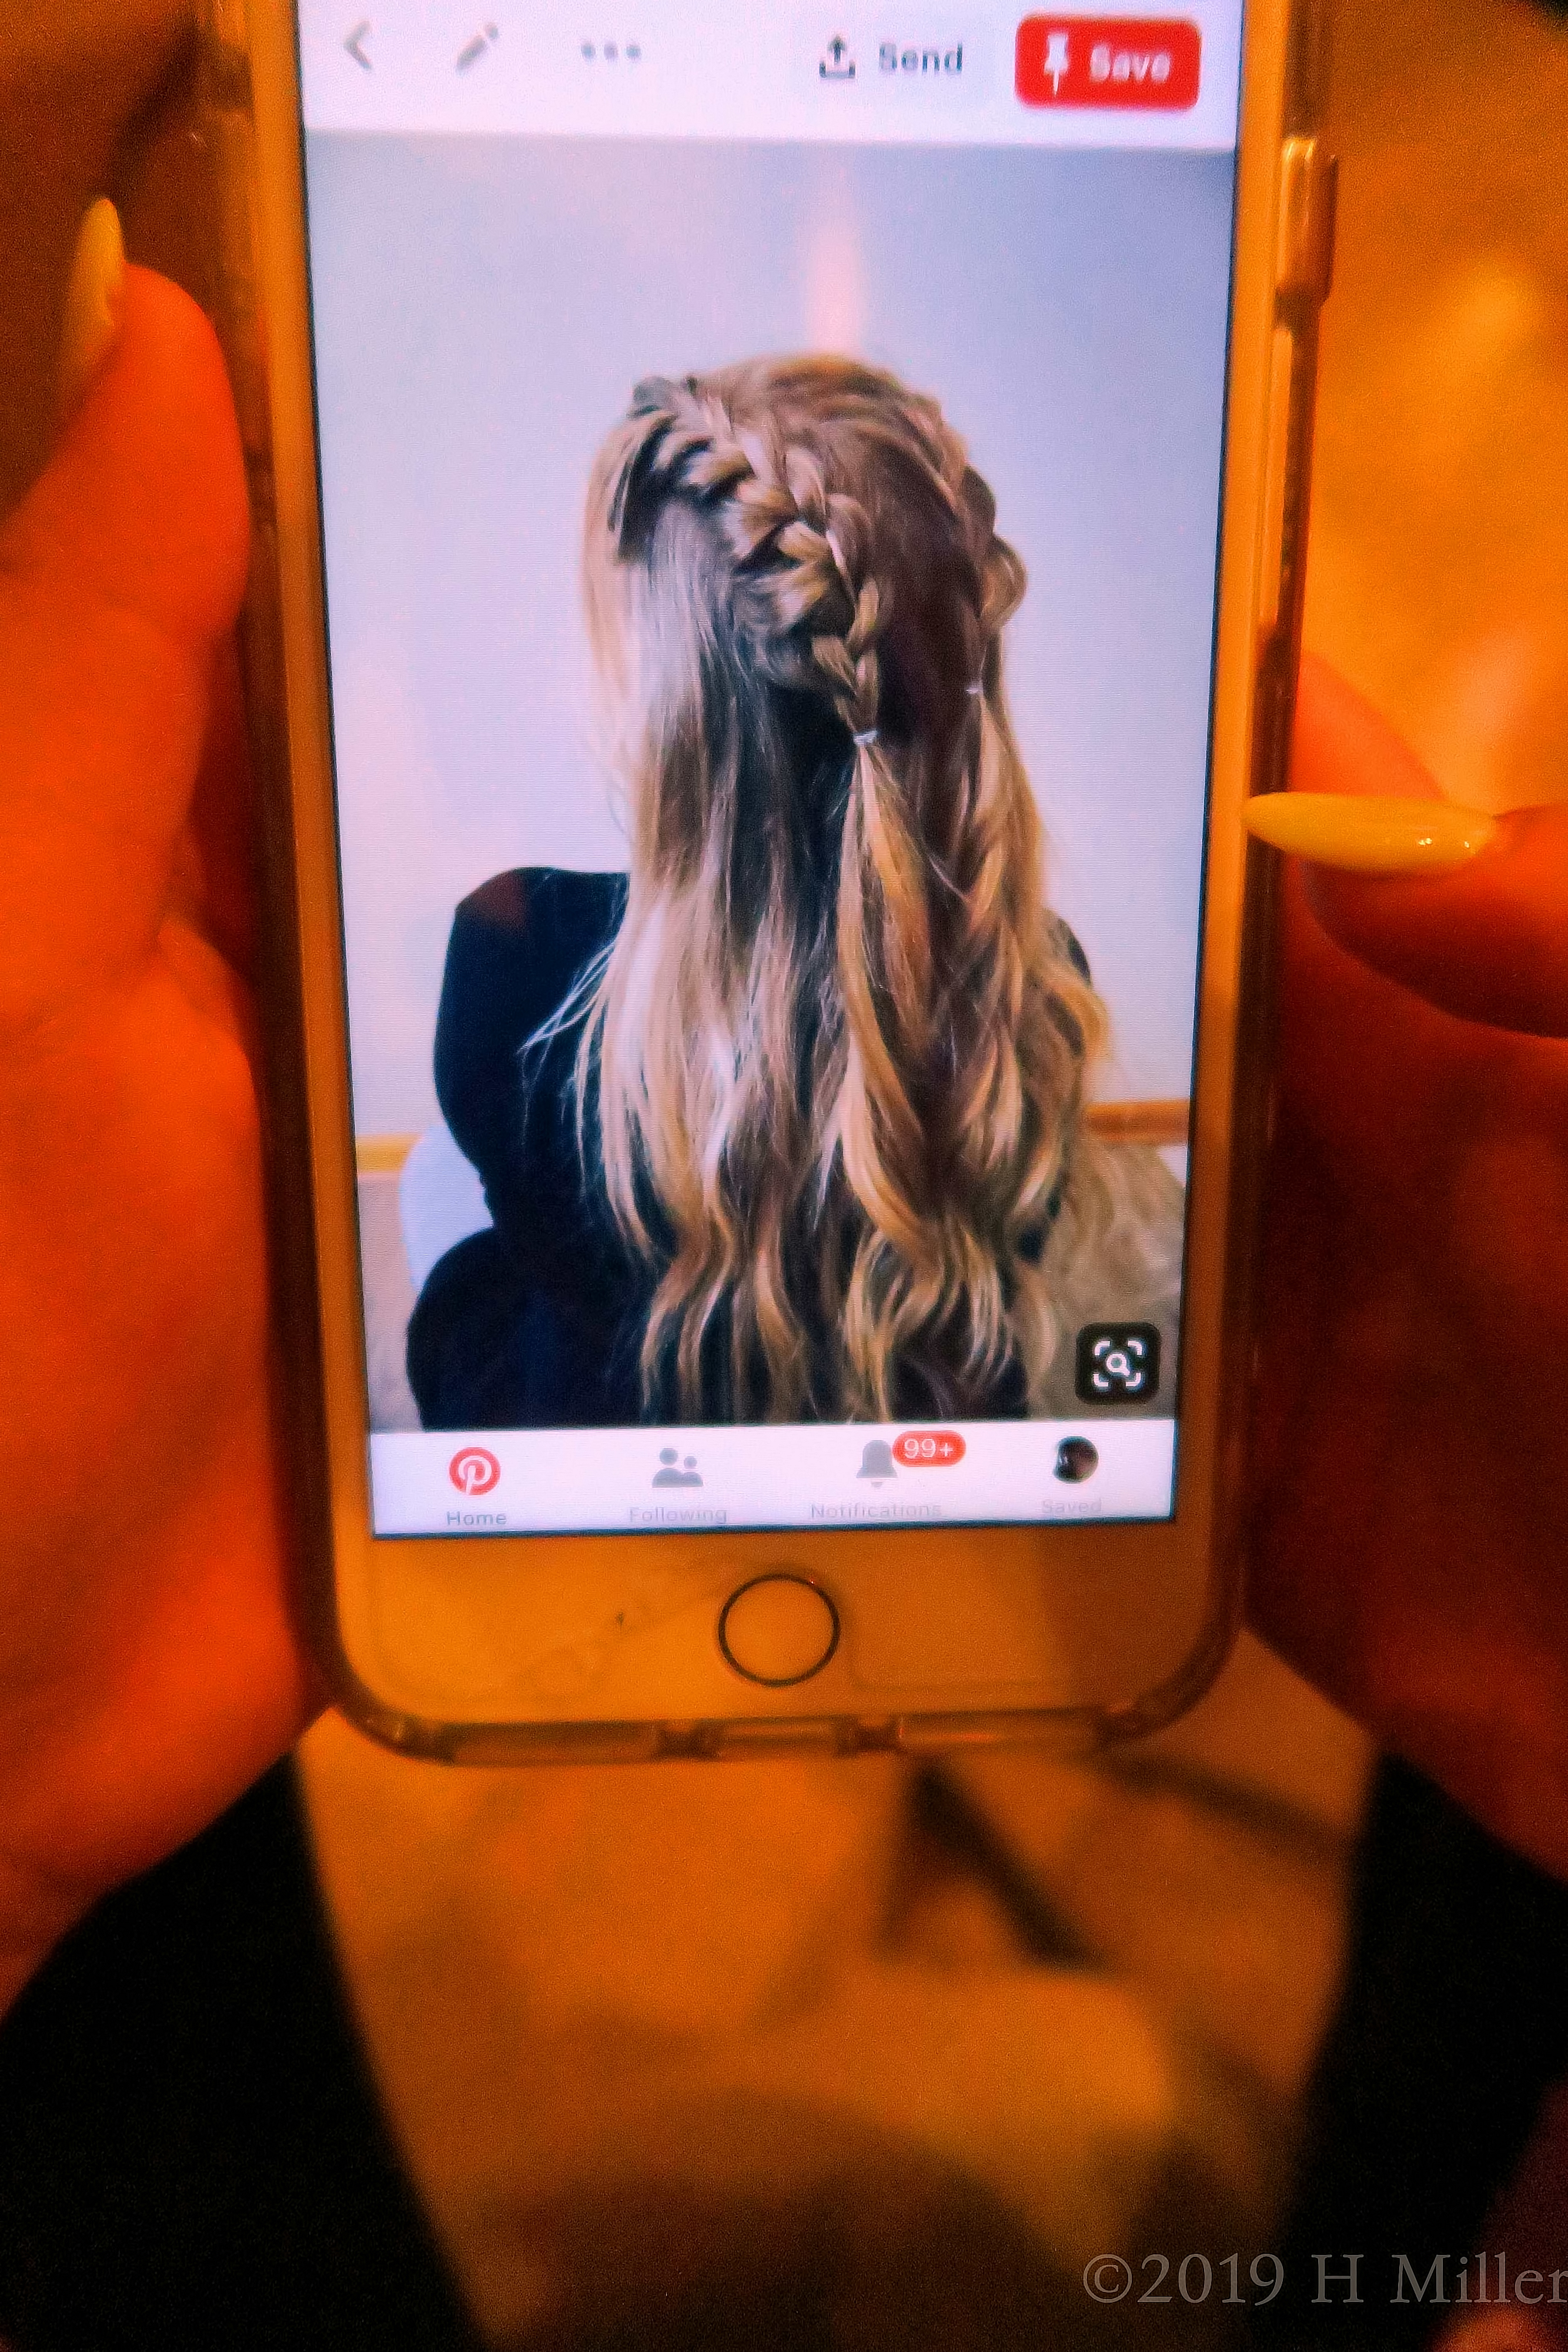 The Pinterest Photo That Inspired Her Girls Hairstyle! 